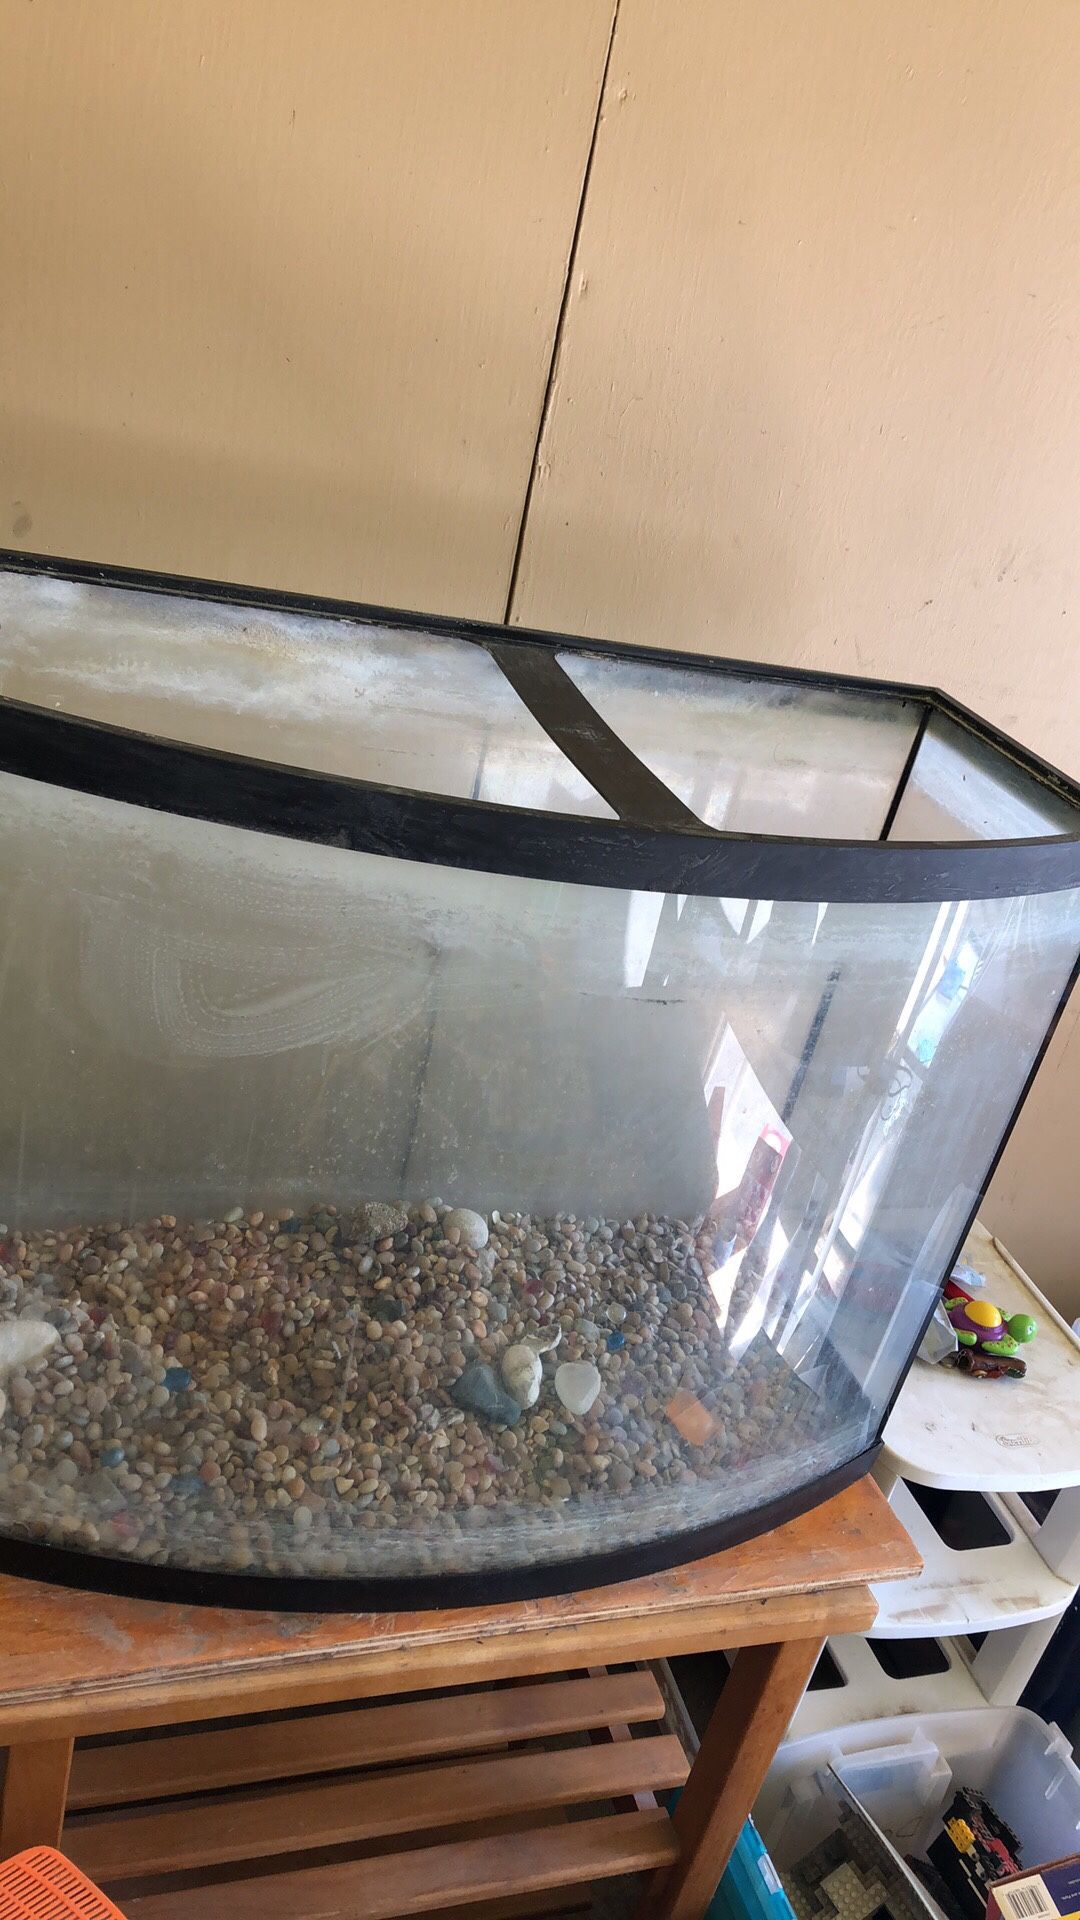 55 gallon fish tank Just the tank 30 inches long 24 inches tall